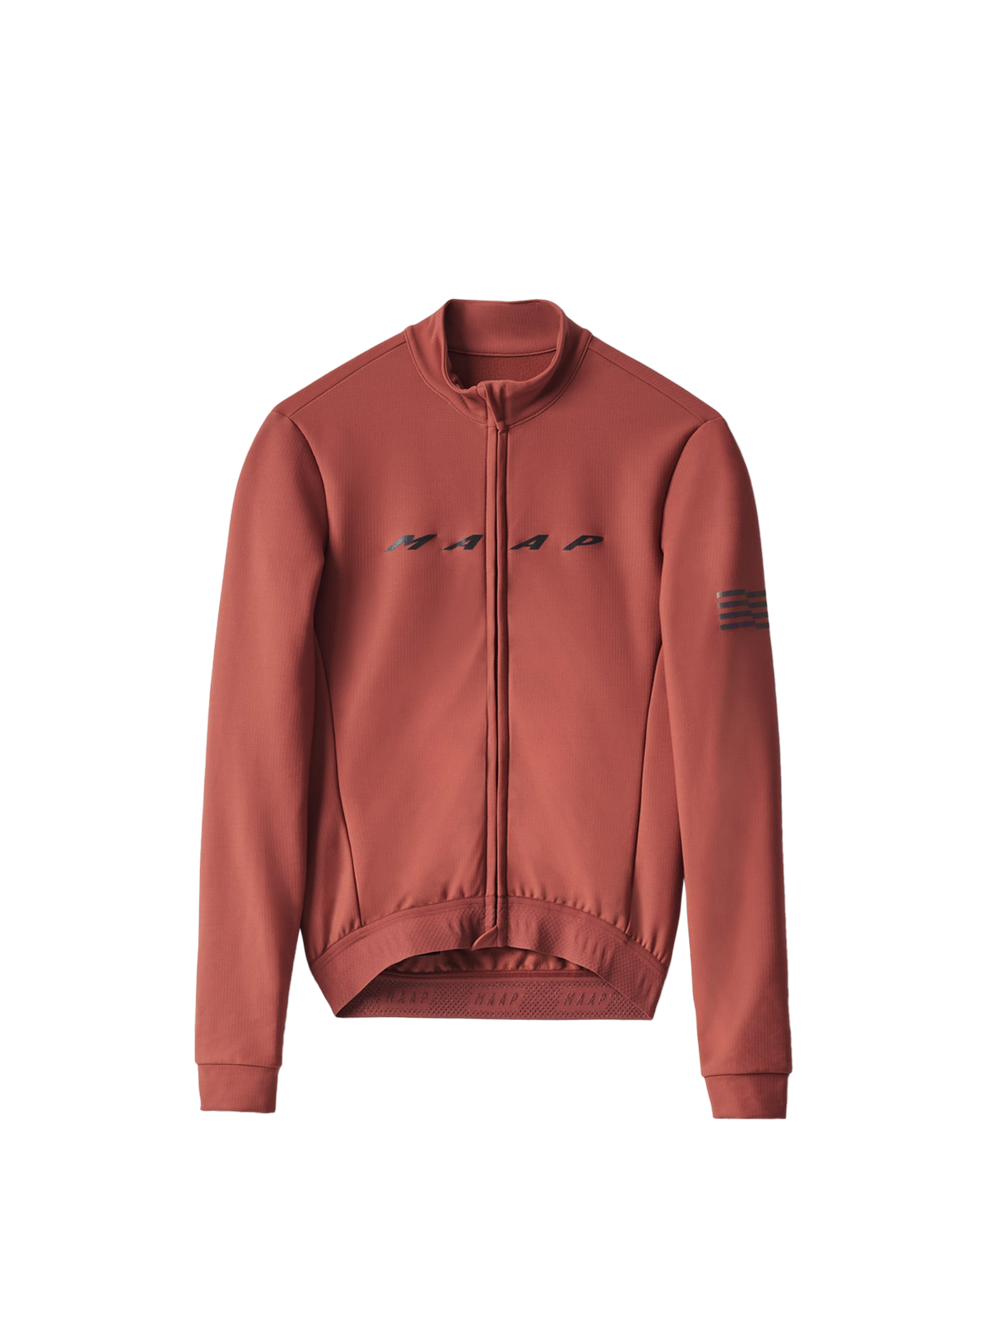 Product Image for Evade Thermal LS Jersey